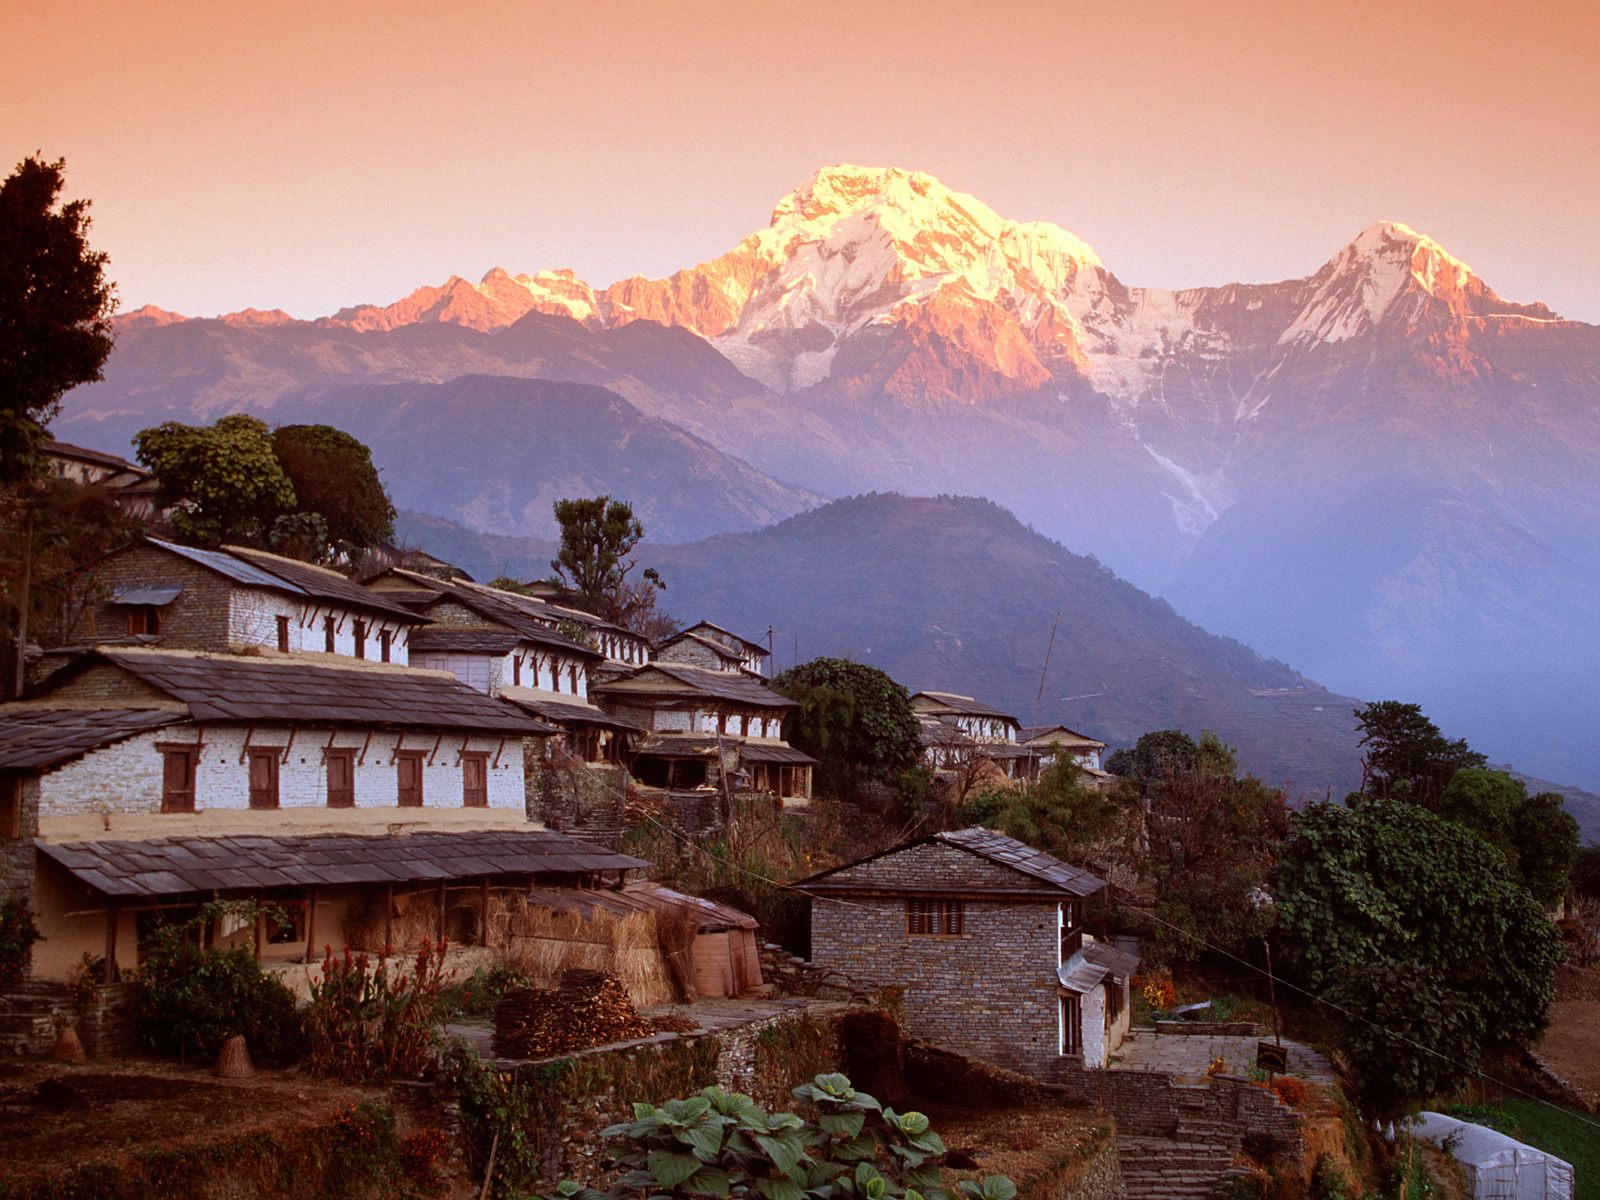  Nepal Himalaya wallpapers and images   wallpapers pictures photos